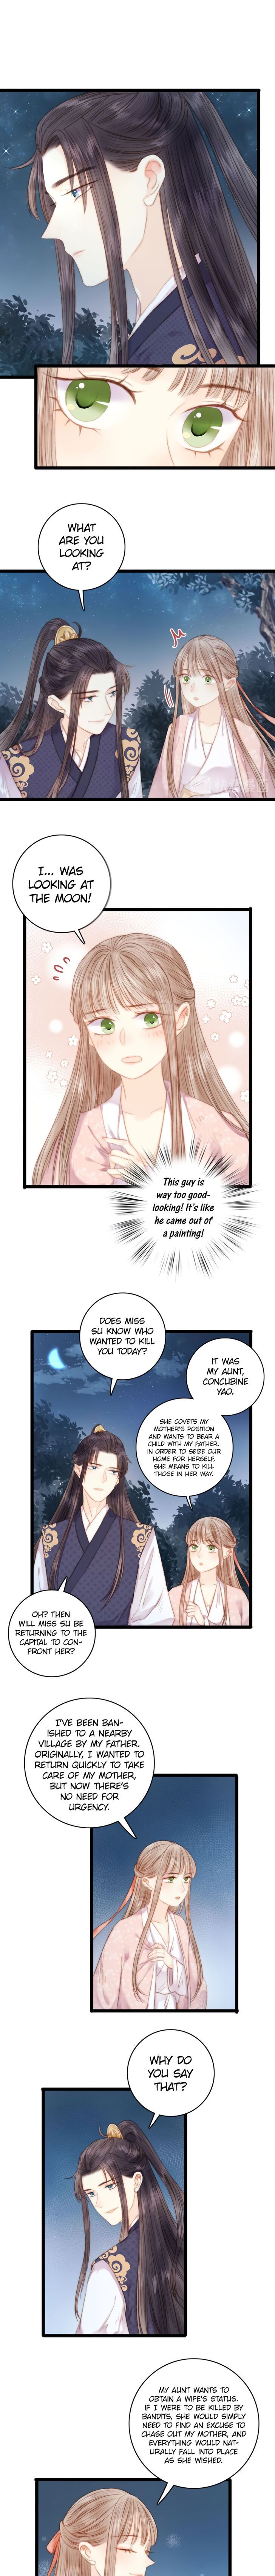 The Goddess of Healing Chapter 043 page 5